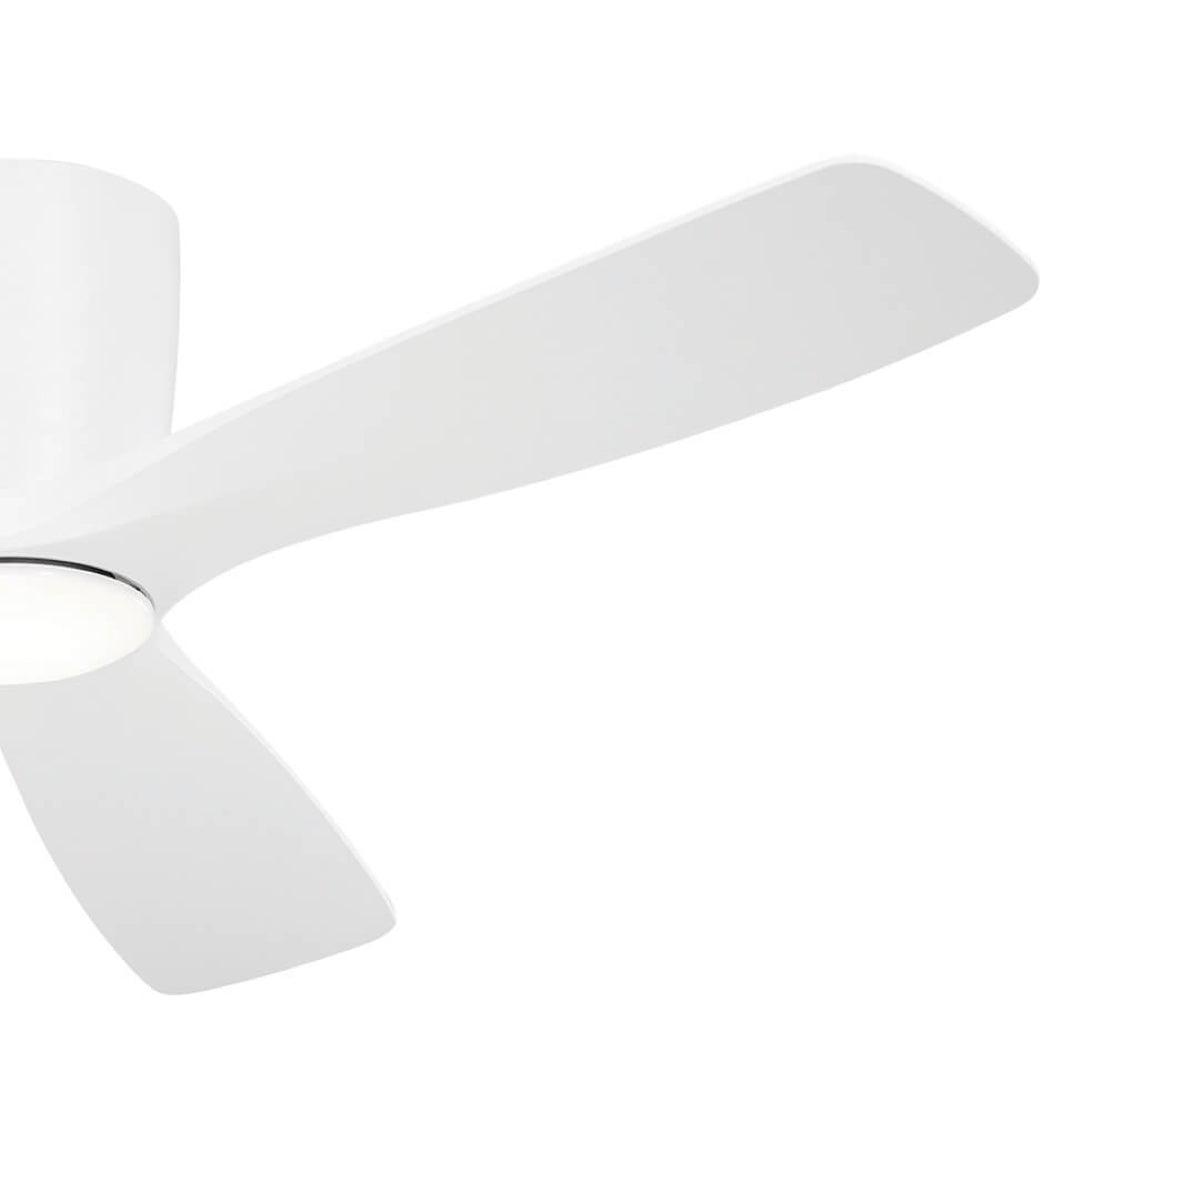 Volos 54 Inch Contemporary Ceiling Fan With Light, Wall Control Included